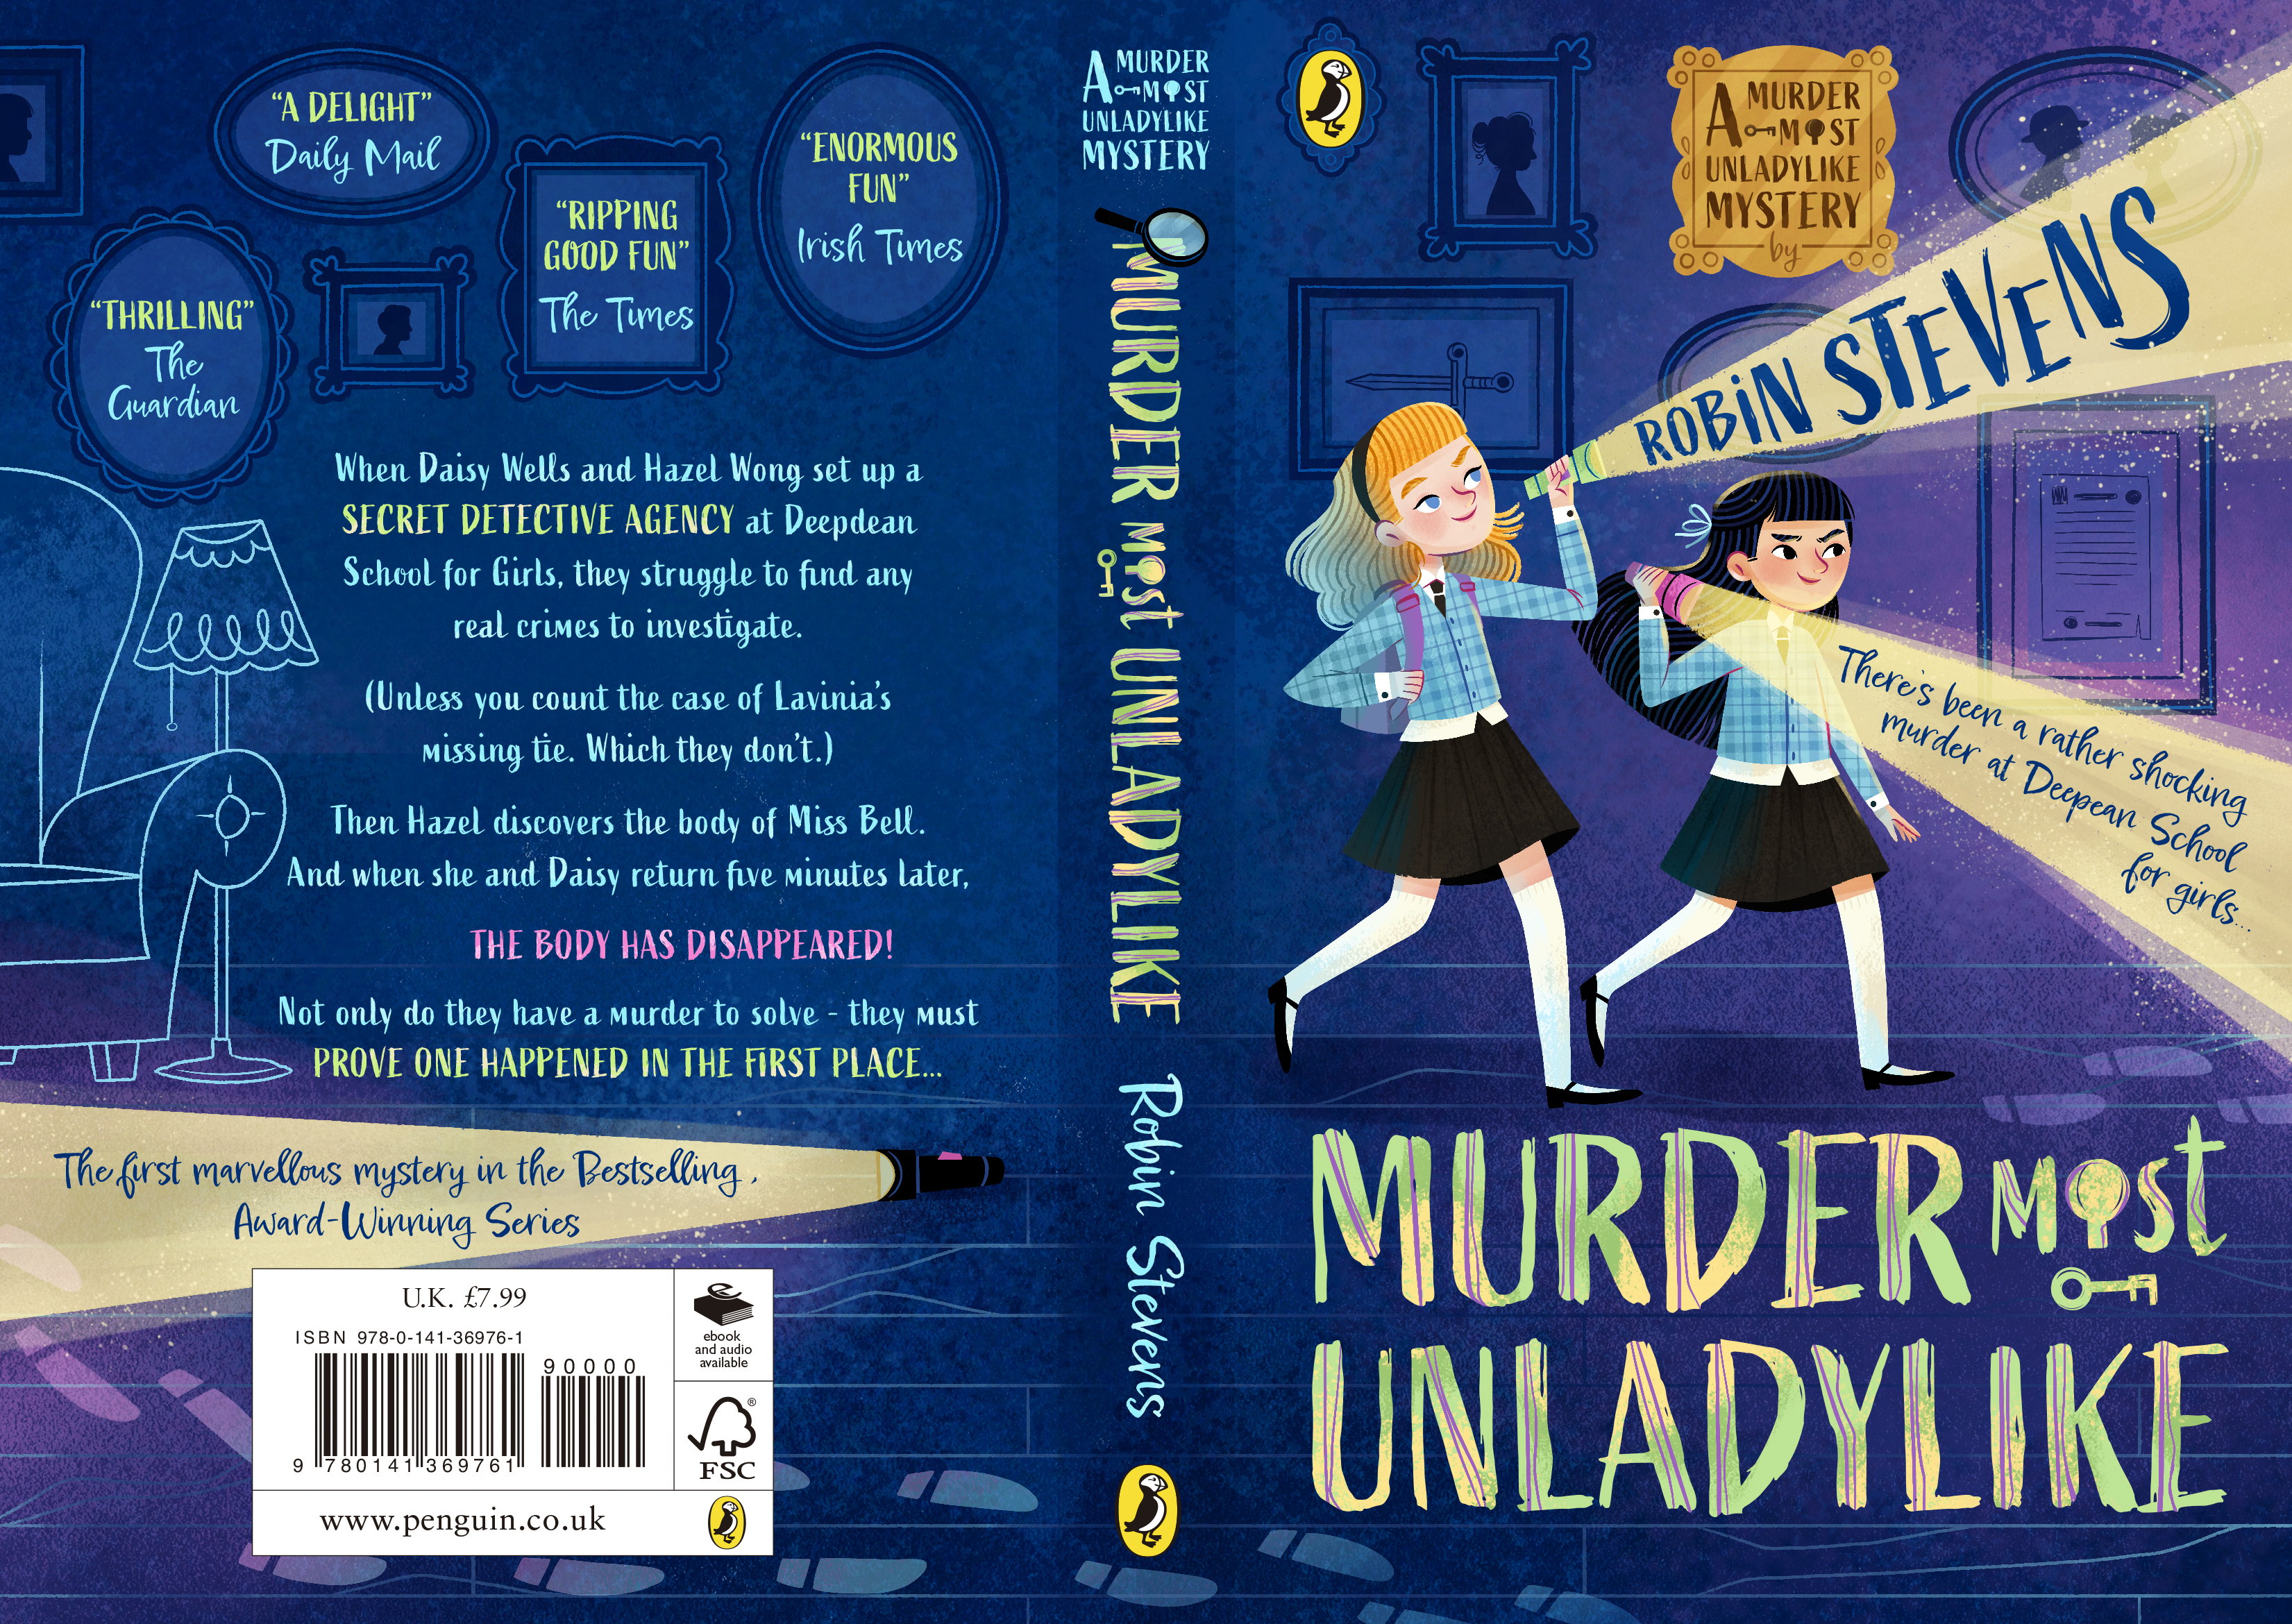 Leticia Ribeiro's cover design of 'Murder Most Unladylike'